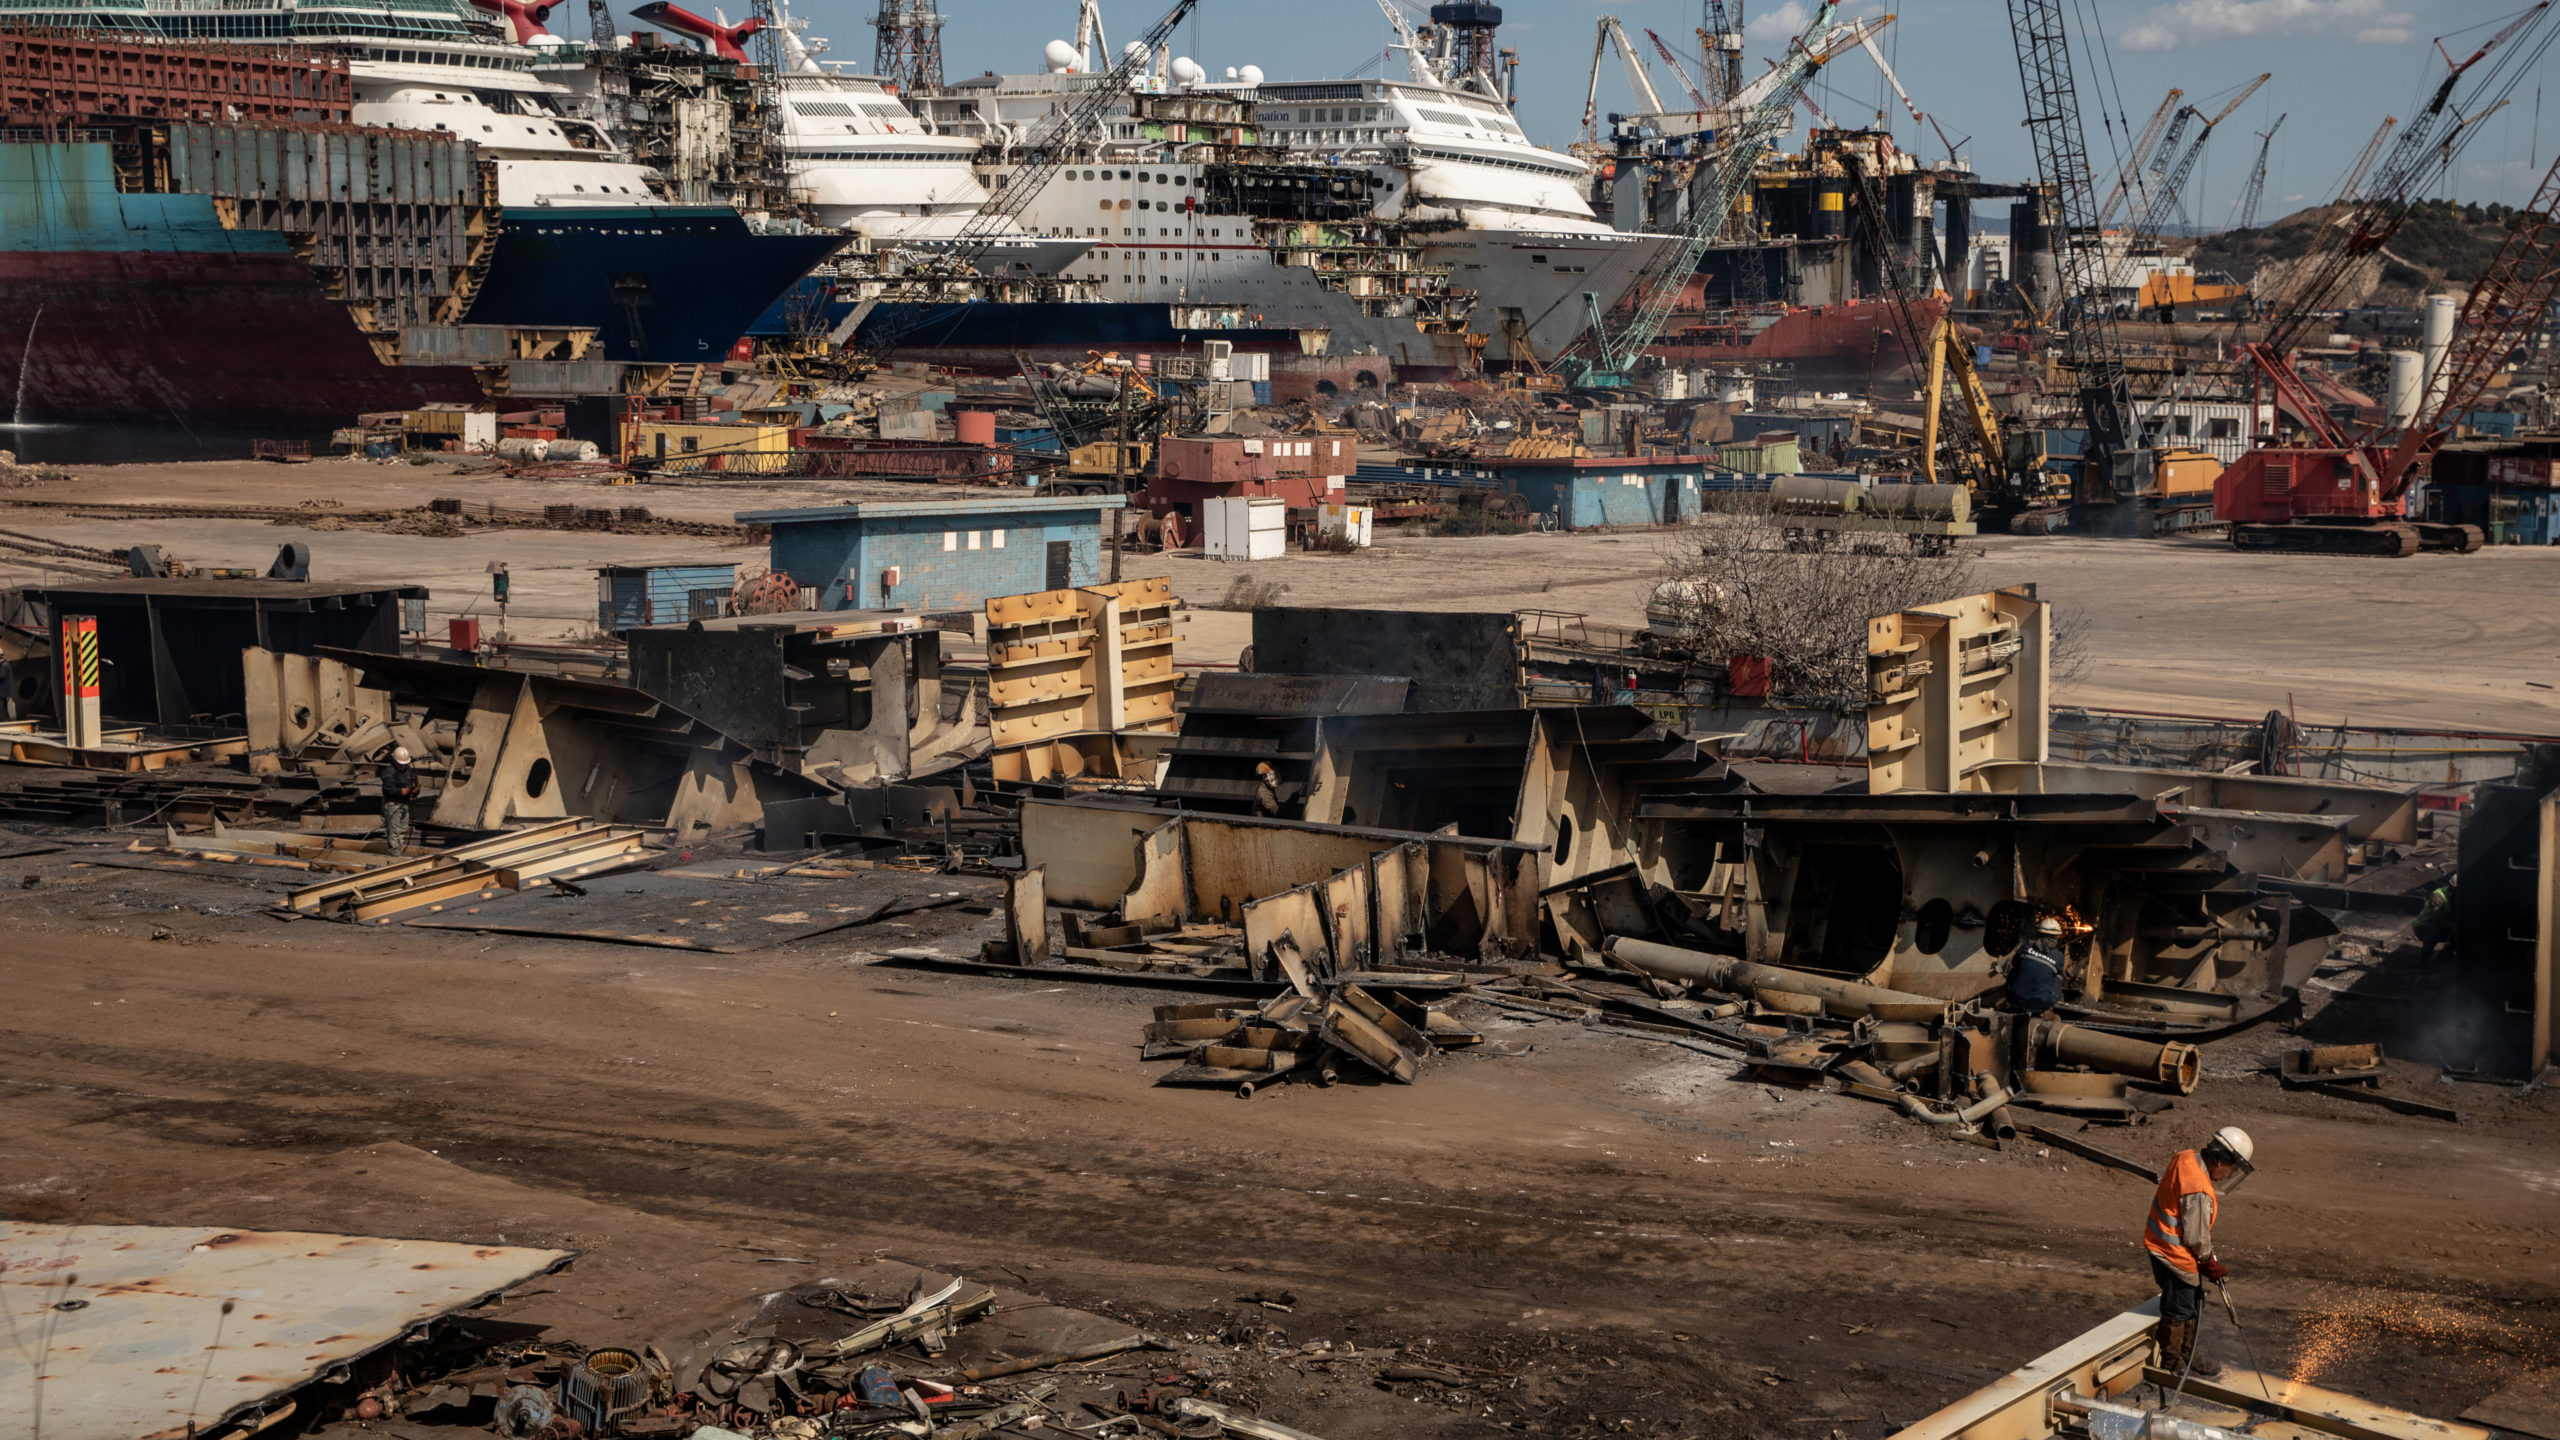 A man works at a ship recycling yard in front of five luxury cruise ships that are being broken down for scrap metal at the Aliaga ship recycling port on October 02, 2020 in Izmir, Turkey.  (Photo: Chris McGrath, Getty Images)